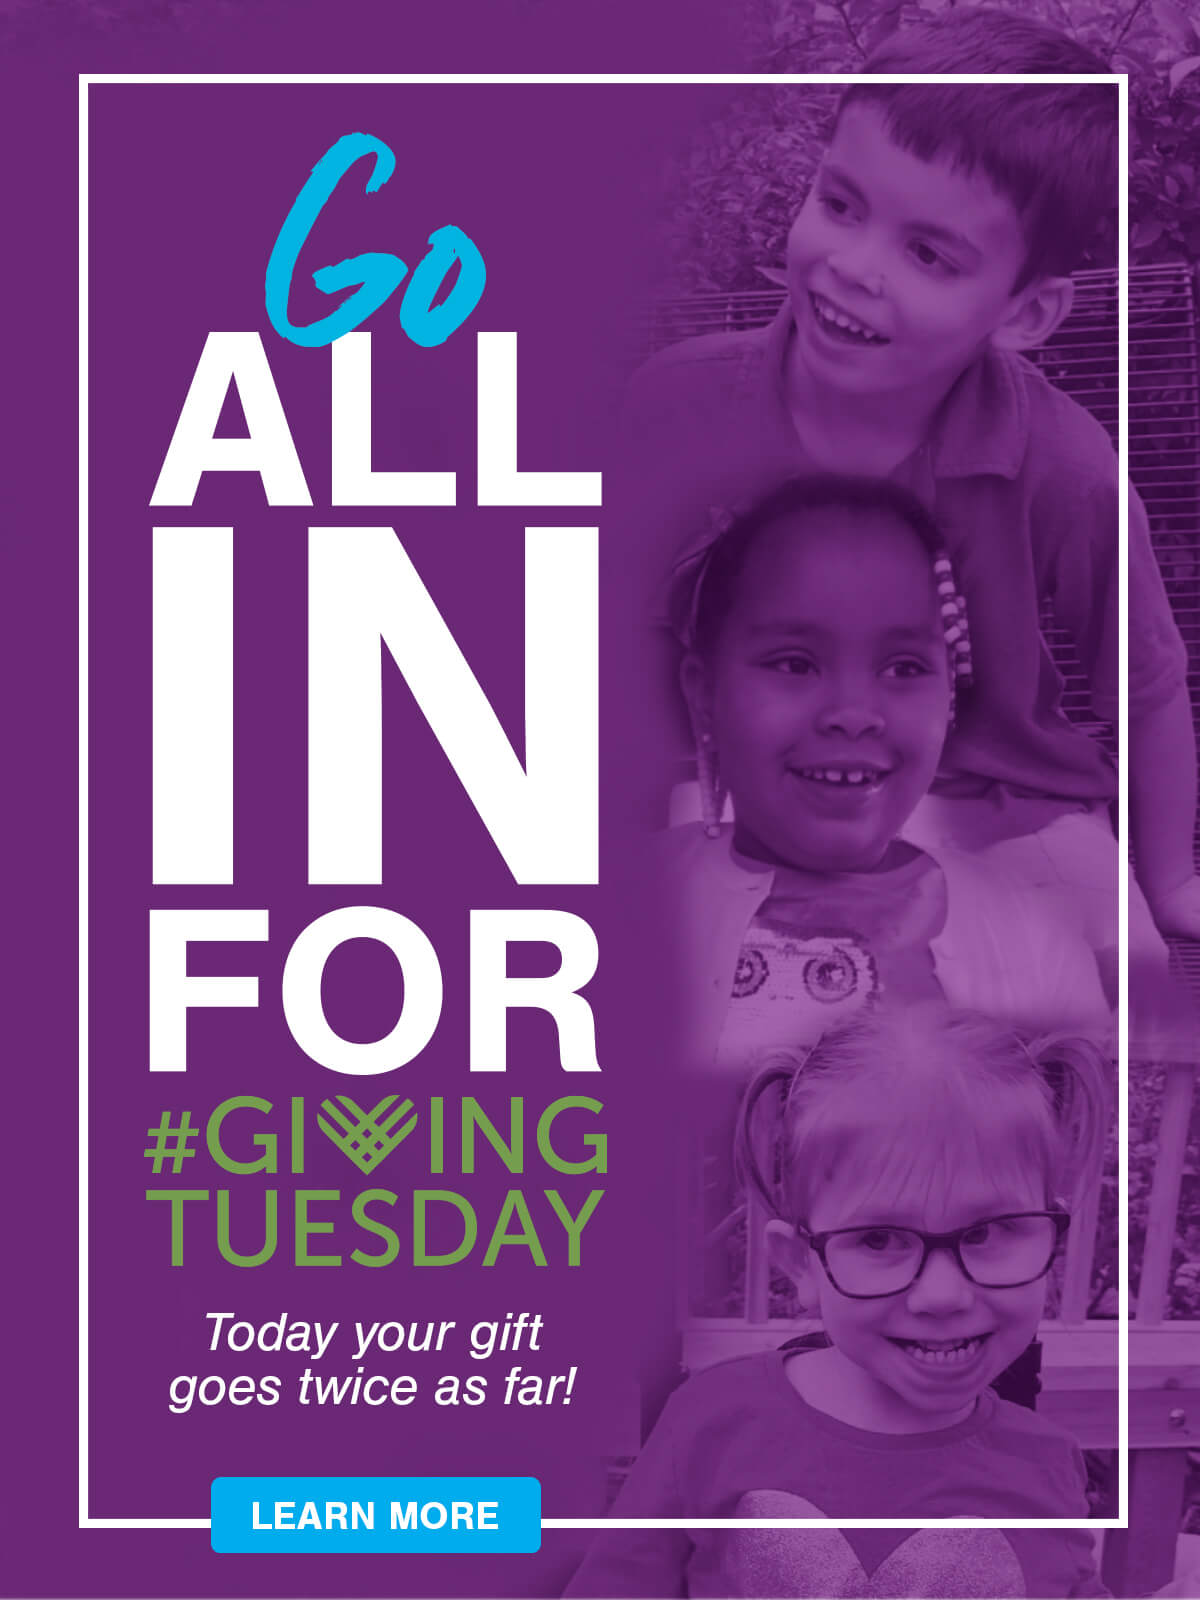 Go All In For Giving Tuesday